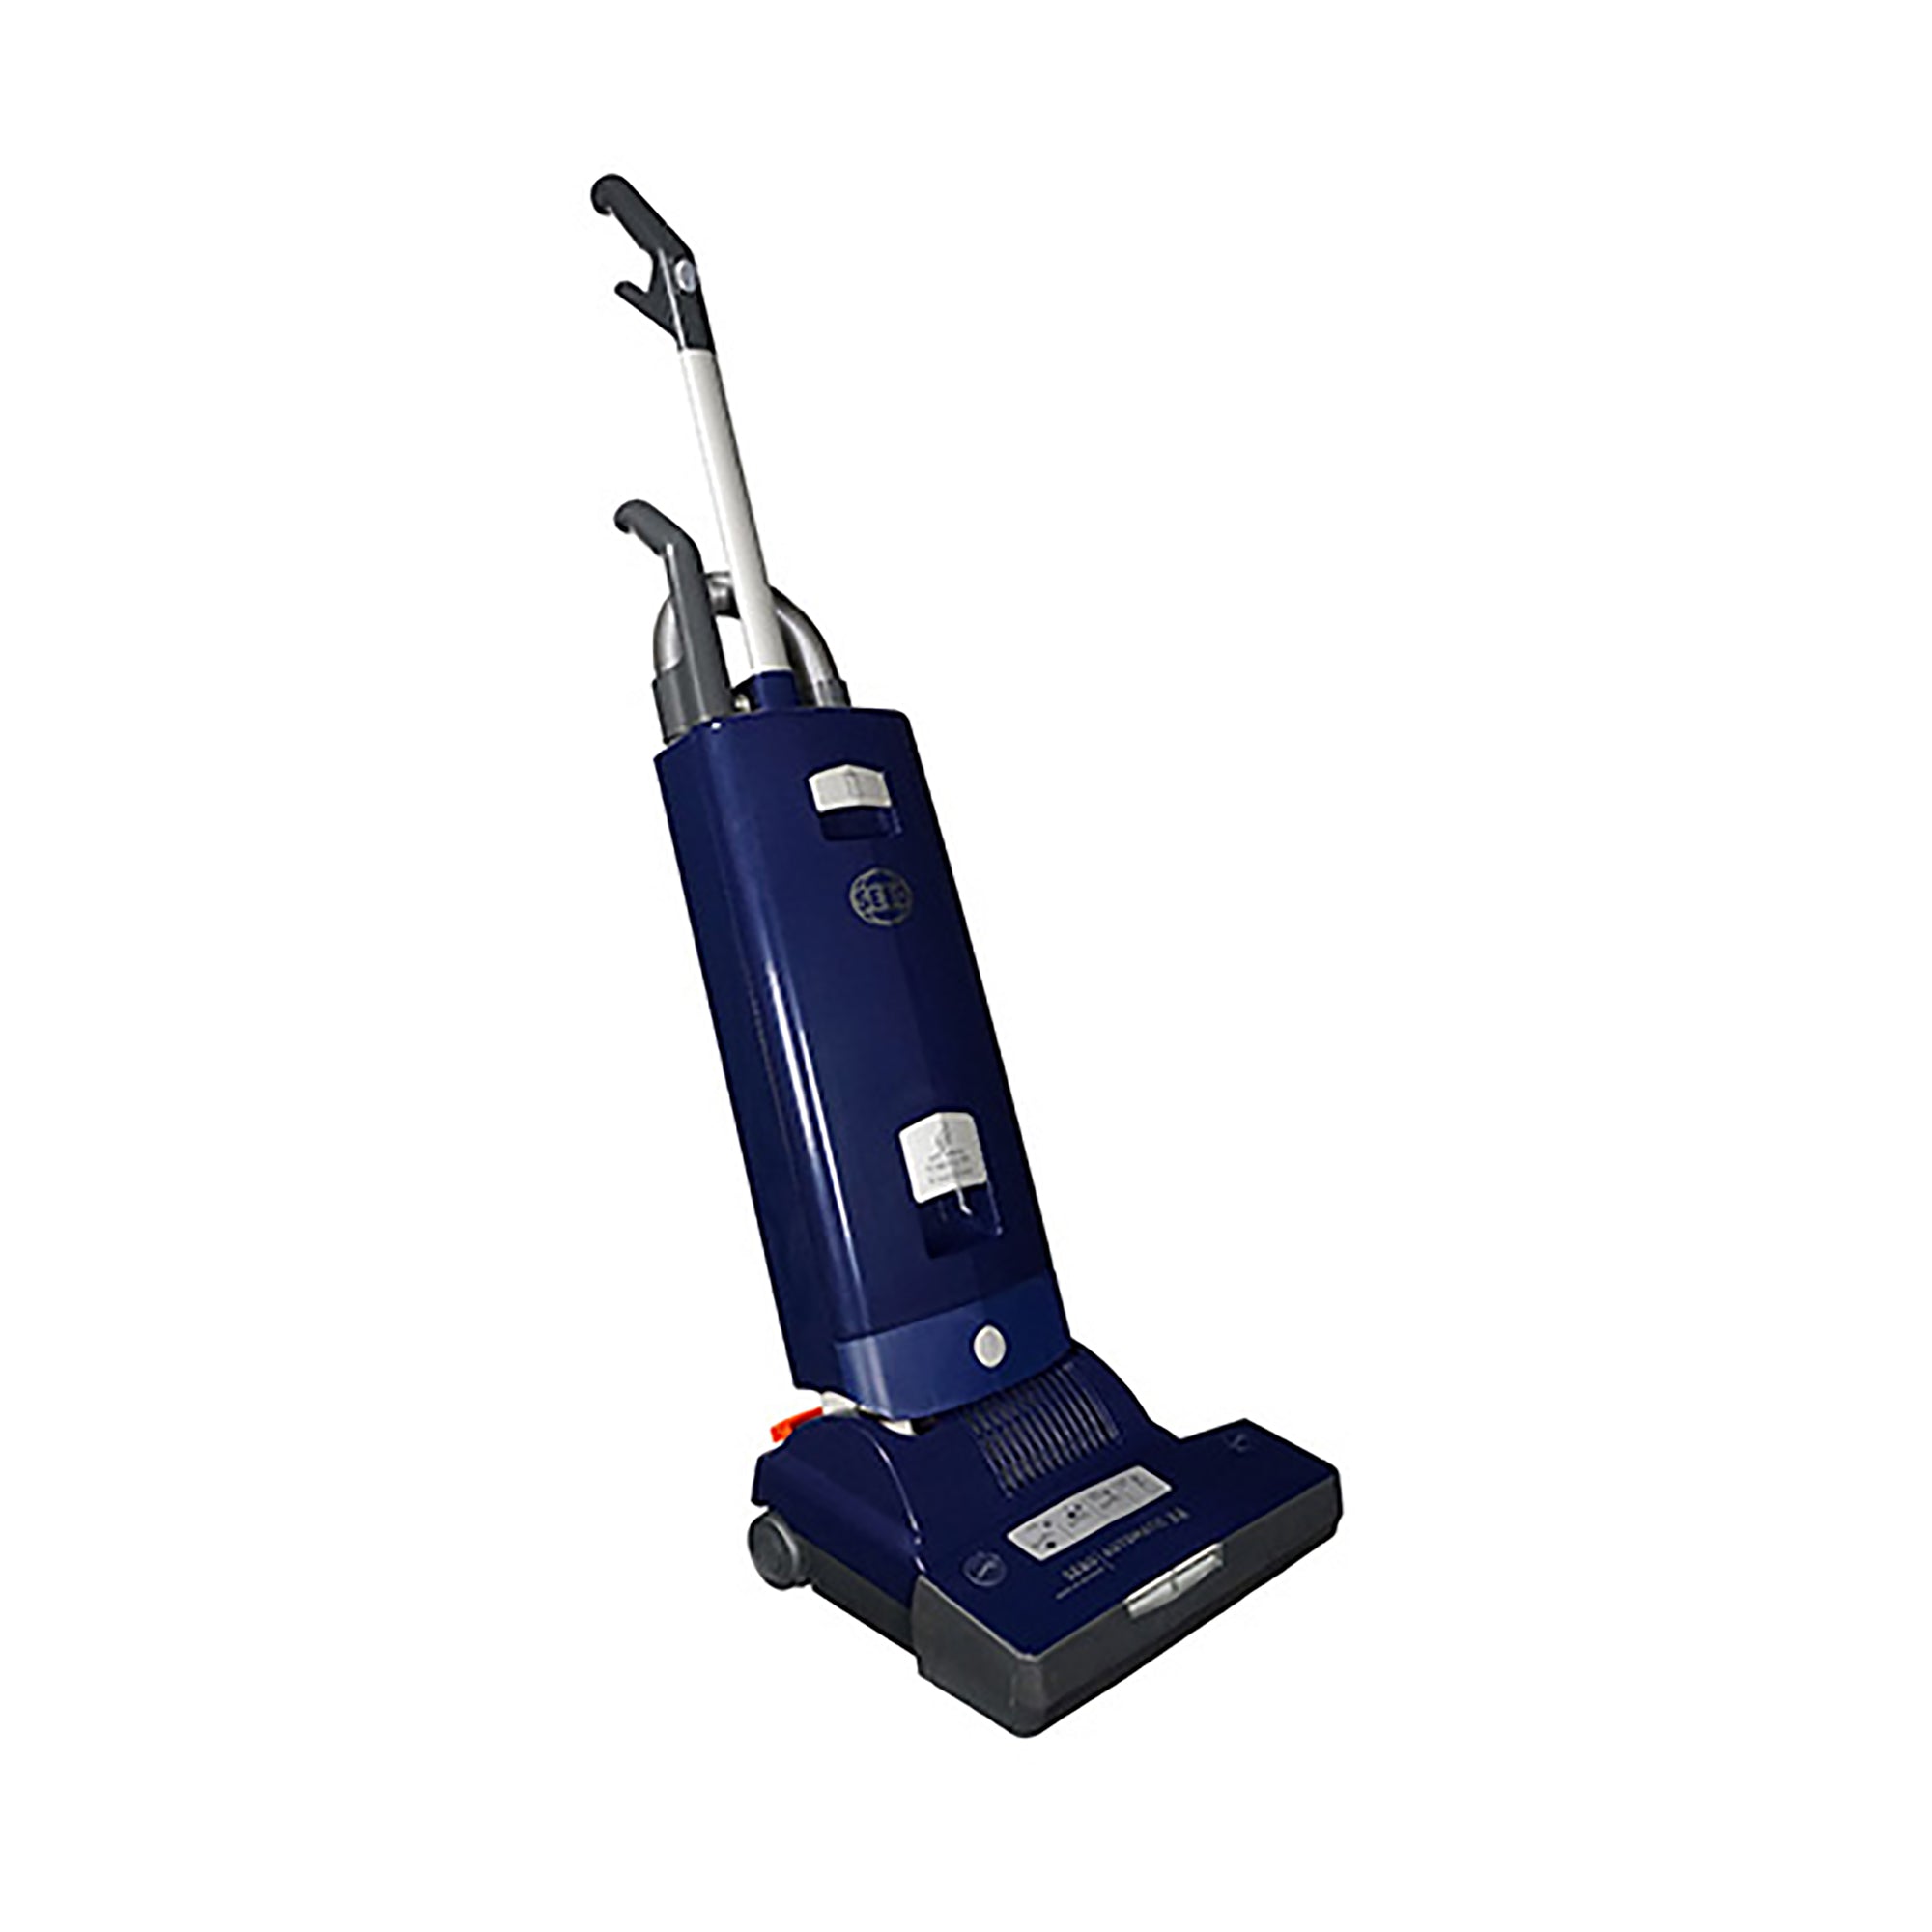 SEBO Automatic X8 Upright Vacuum with 15" Cleaning Path